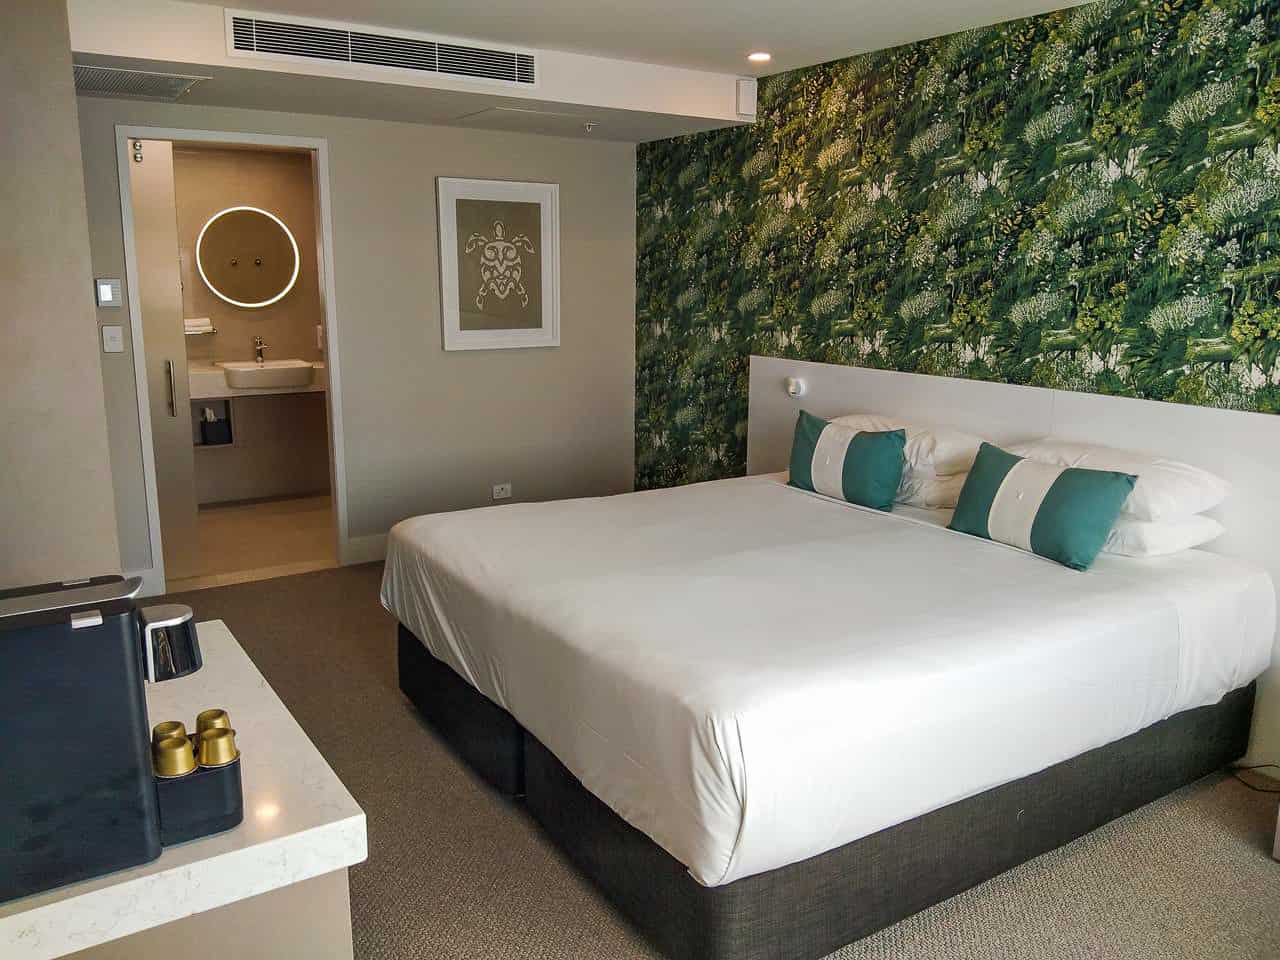 Room at Pacific Hotel in Cairns, Australia // Travel Mermaid